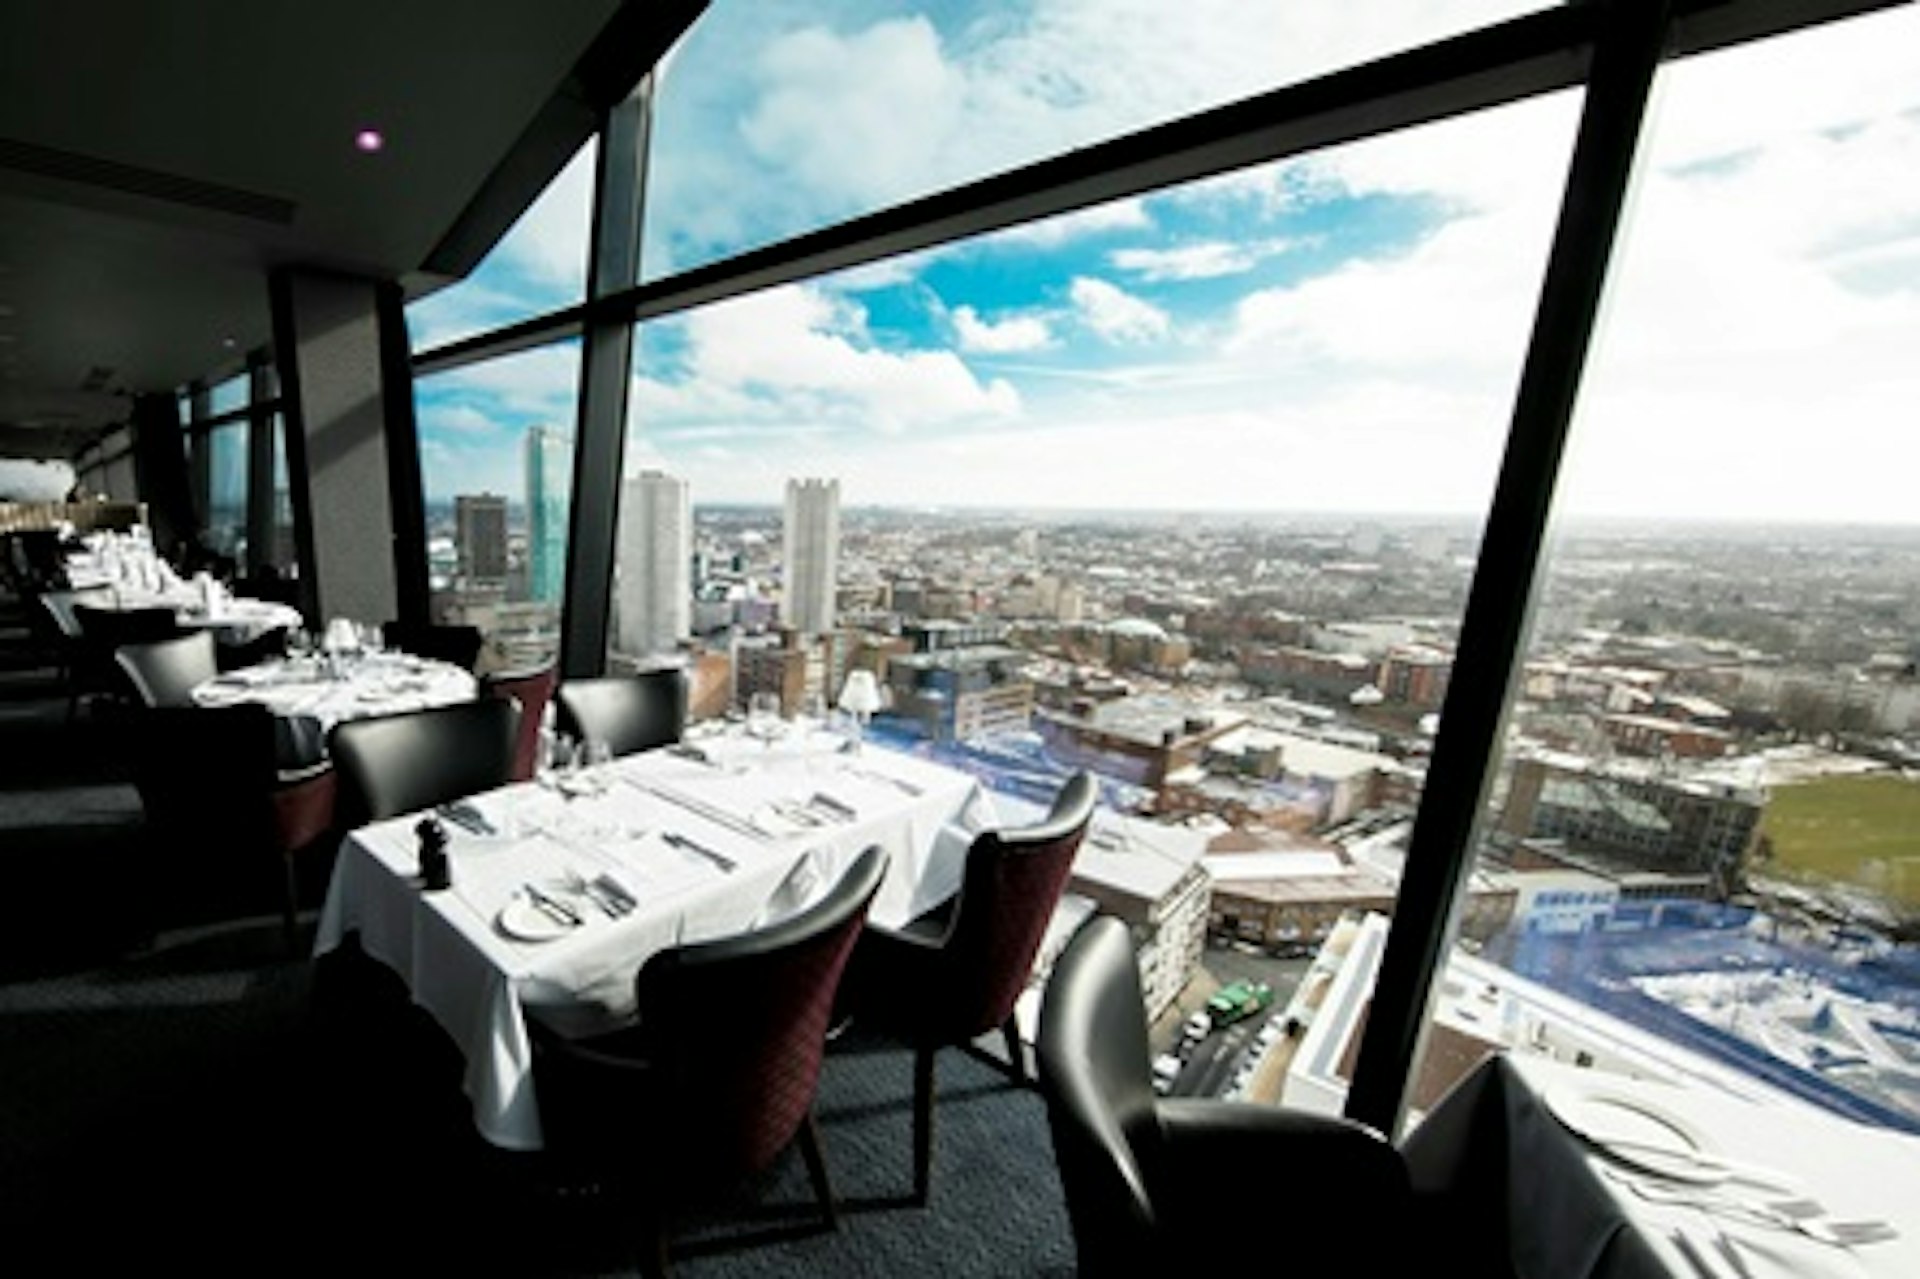 Two Course Meal with Prosecco for Two at Marco Pierre White Restaurant, Birmingham 2